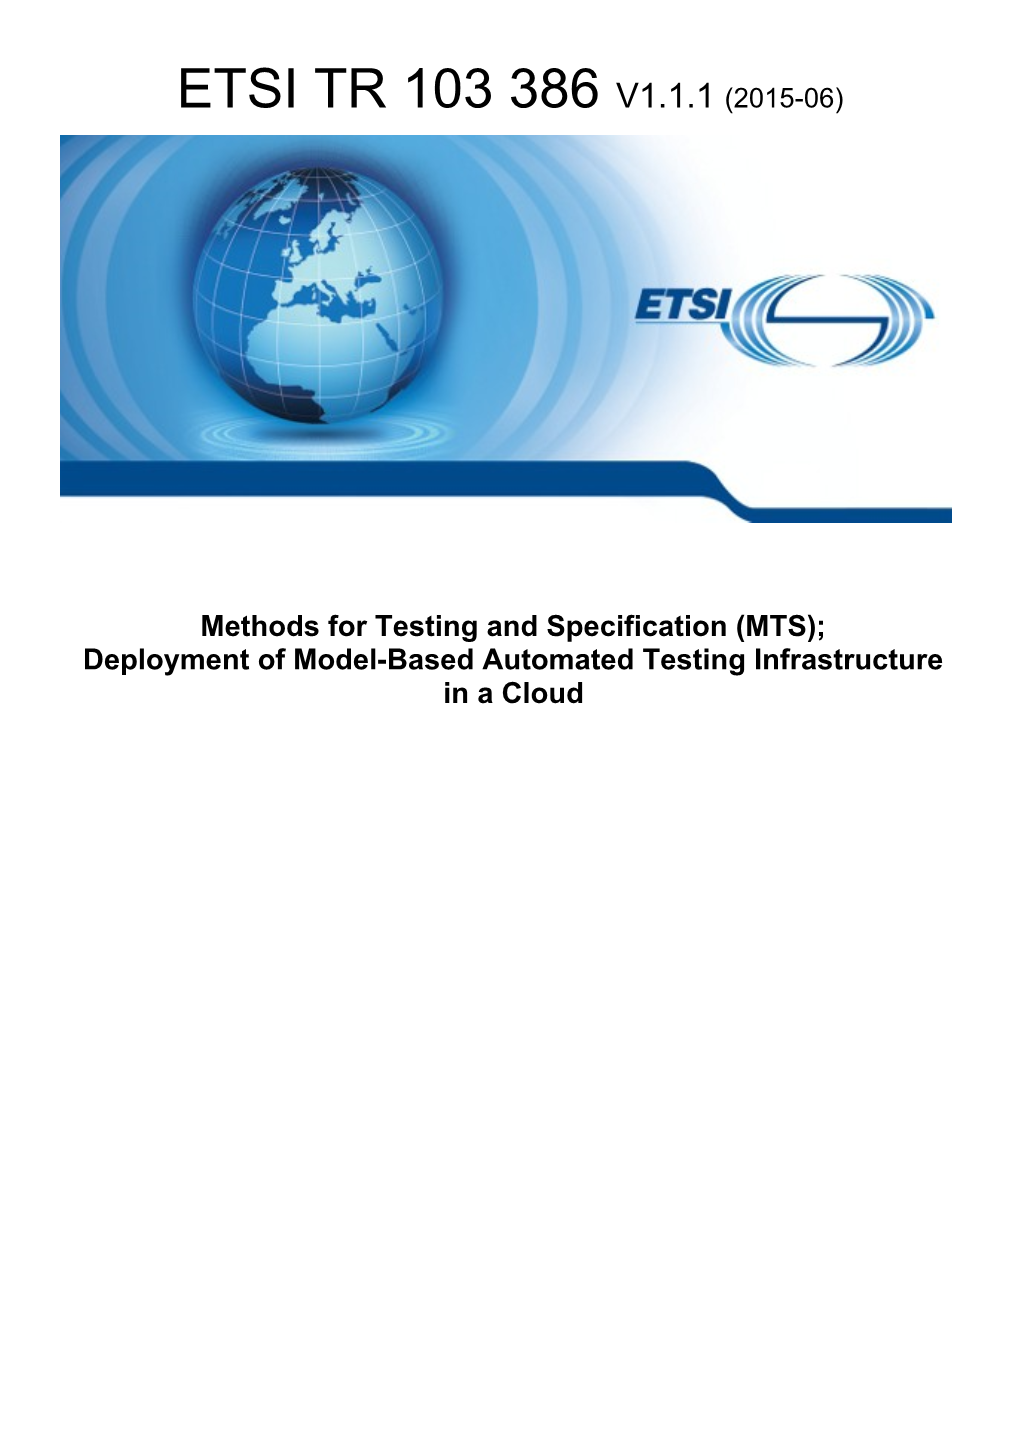 Methods for Testing and Specification (MTS);